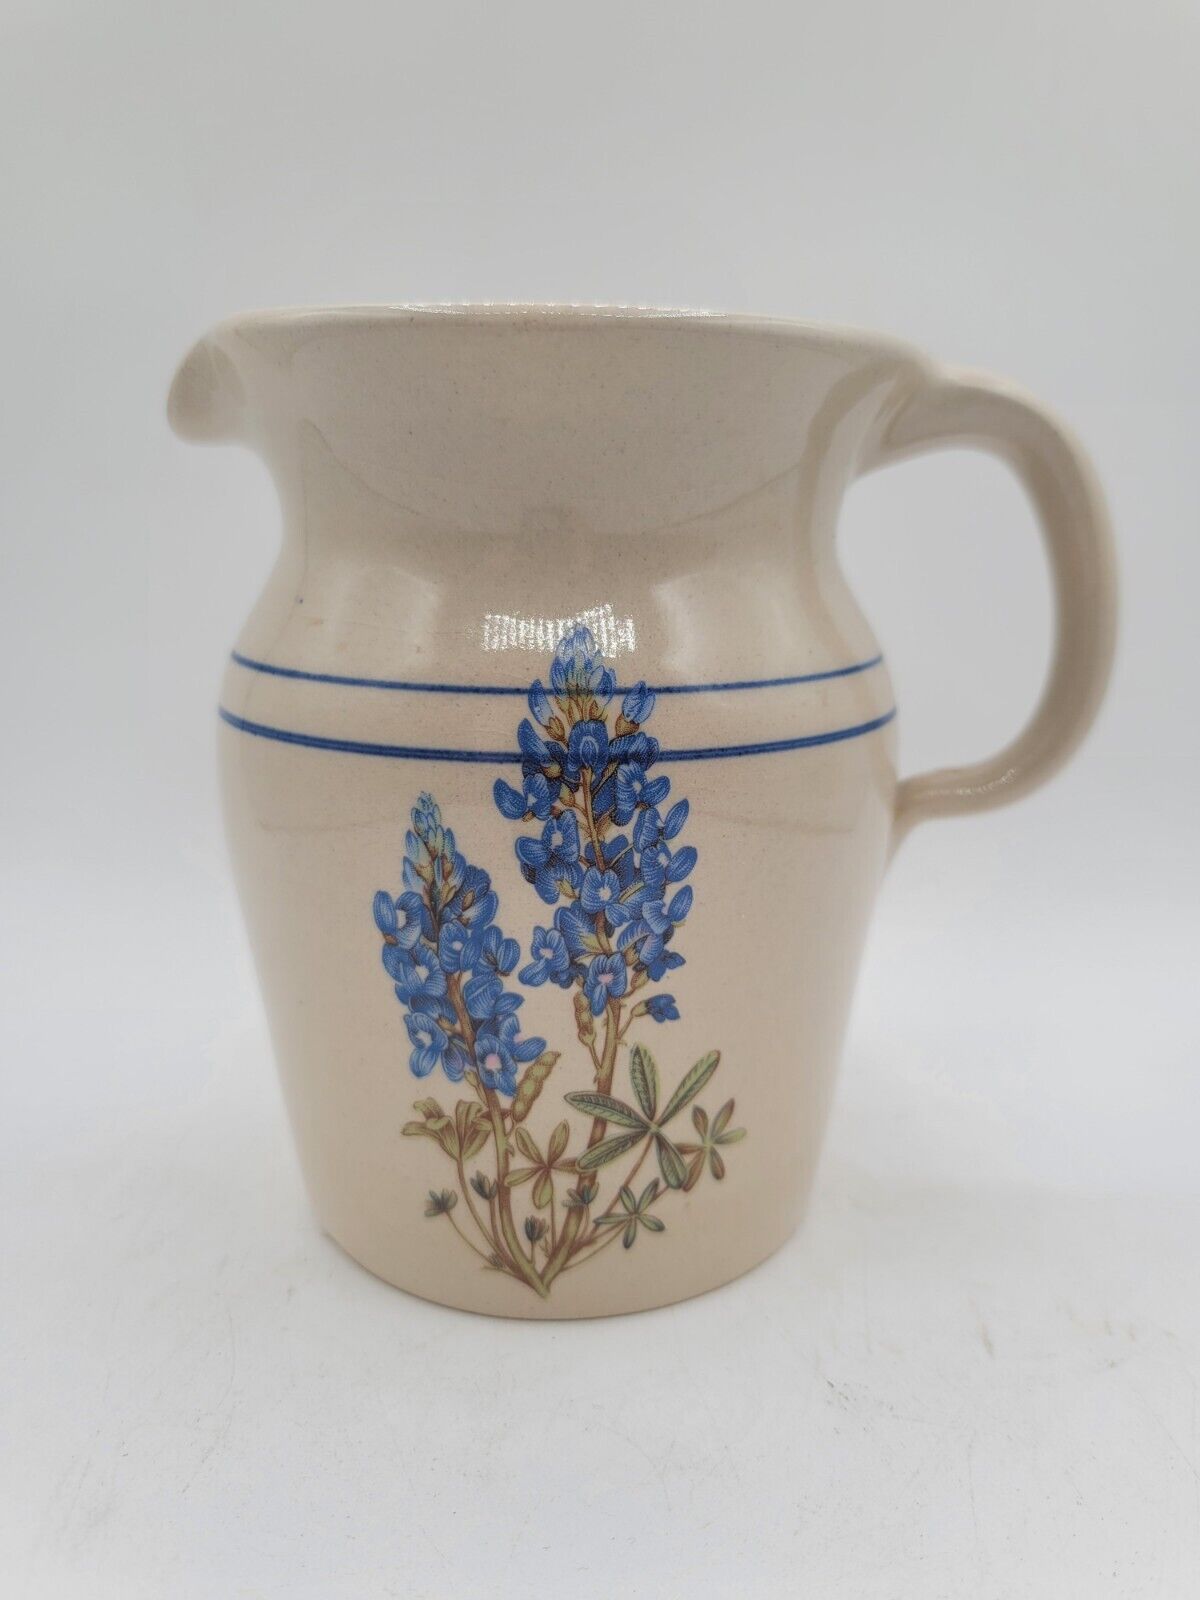 Yesteryears Pottery Hand Turned Crock Pitcher Vase with Bluebonnets Texas